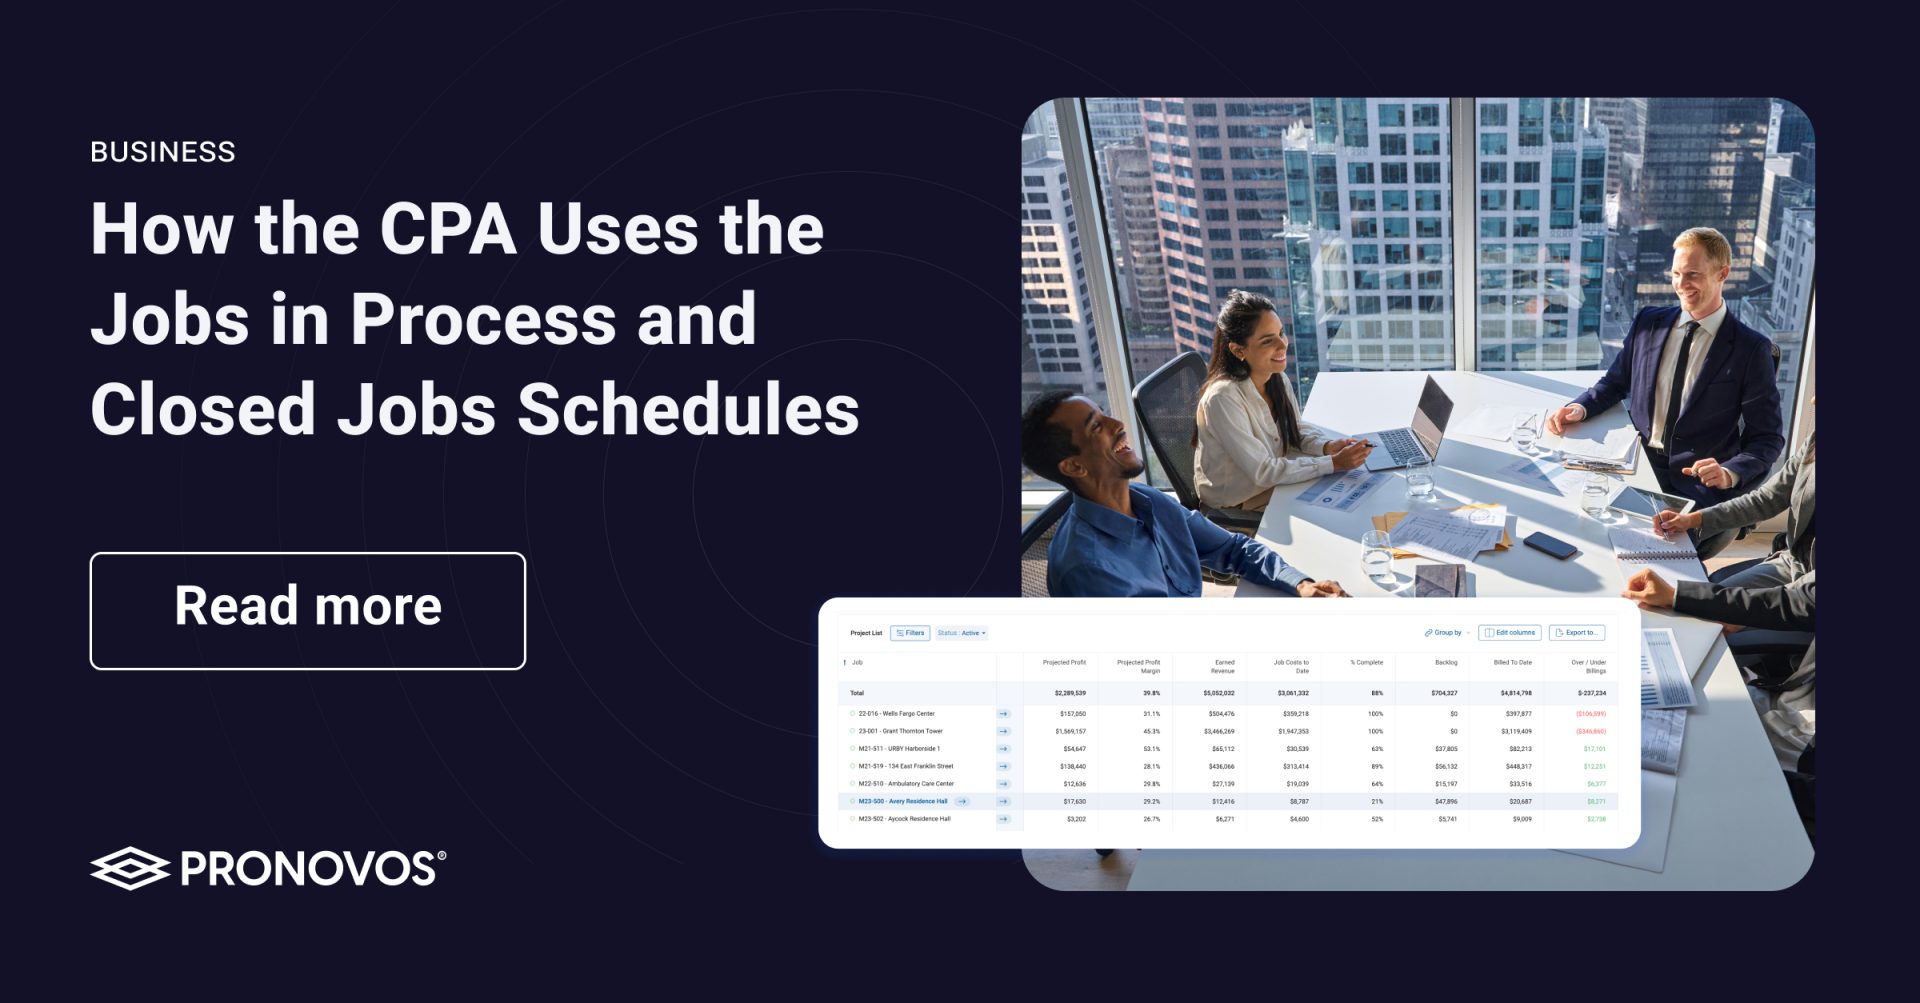 How the CPA Uses the Jobs in Process and Closed Jobs Schedules